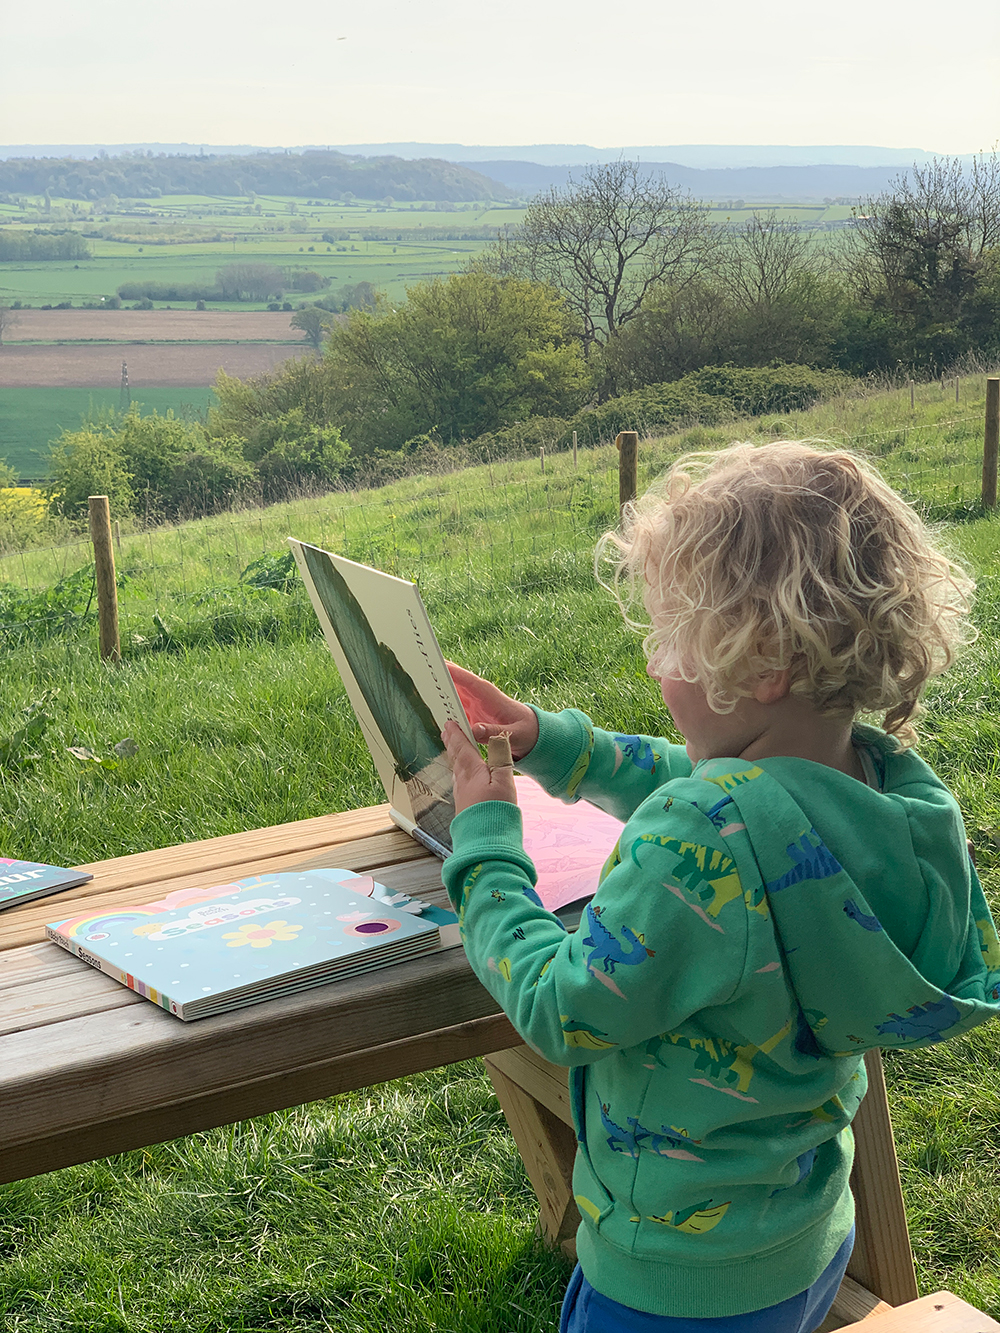 A photo of a young blonde haired child reading a Ladybird book against a beautiful field background